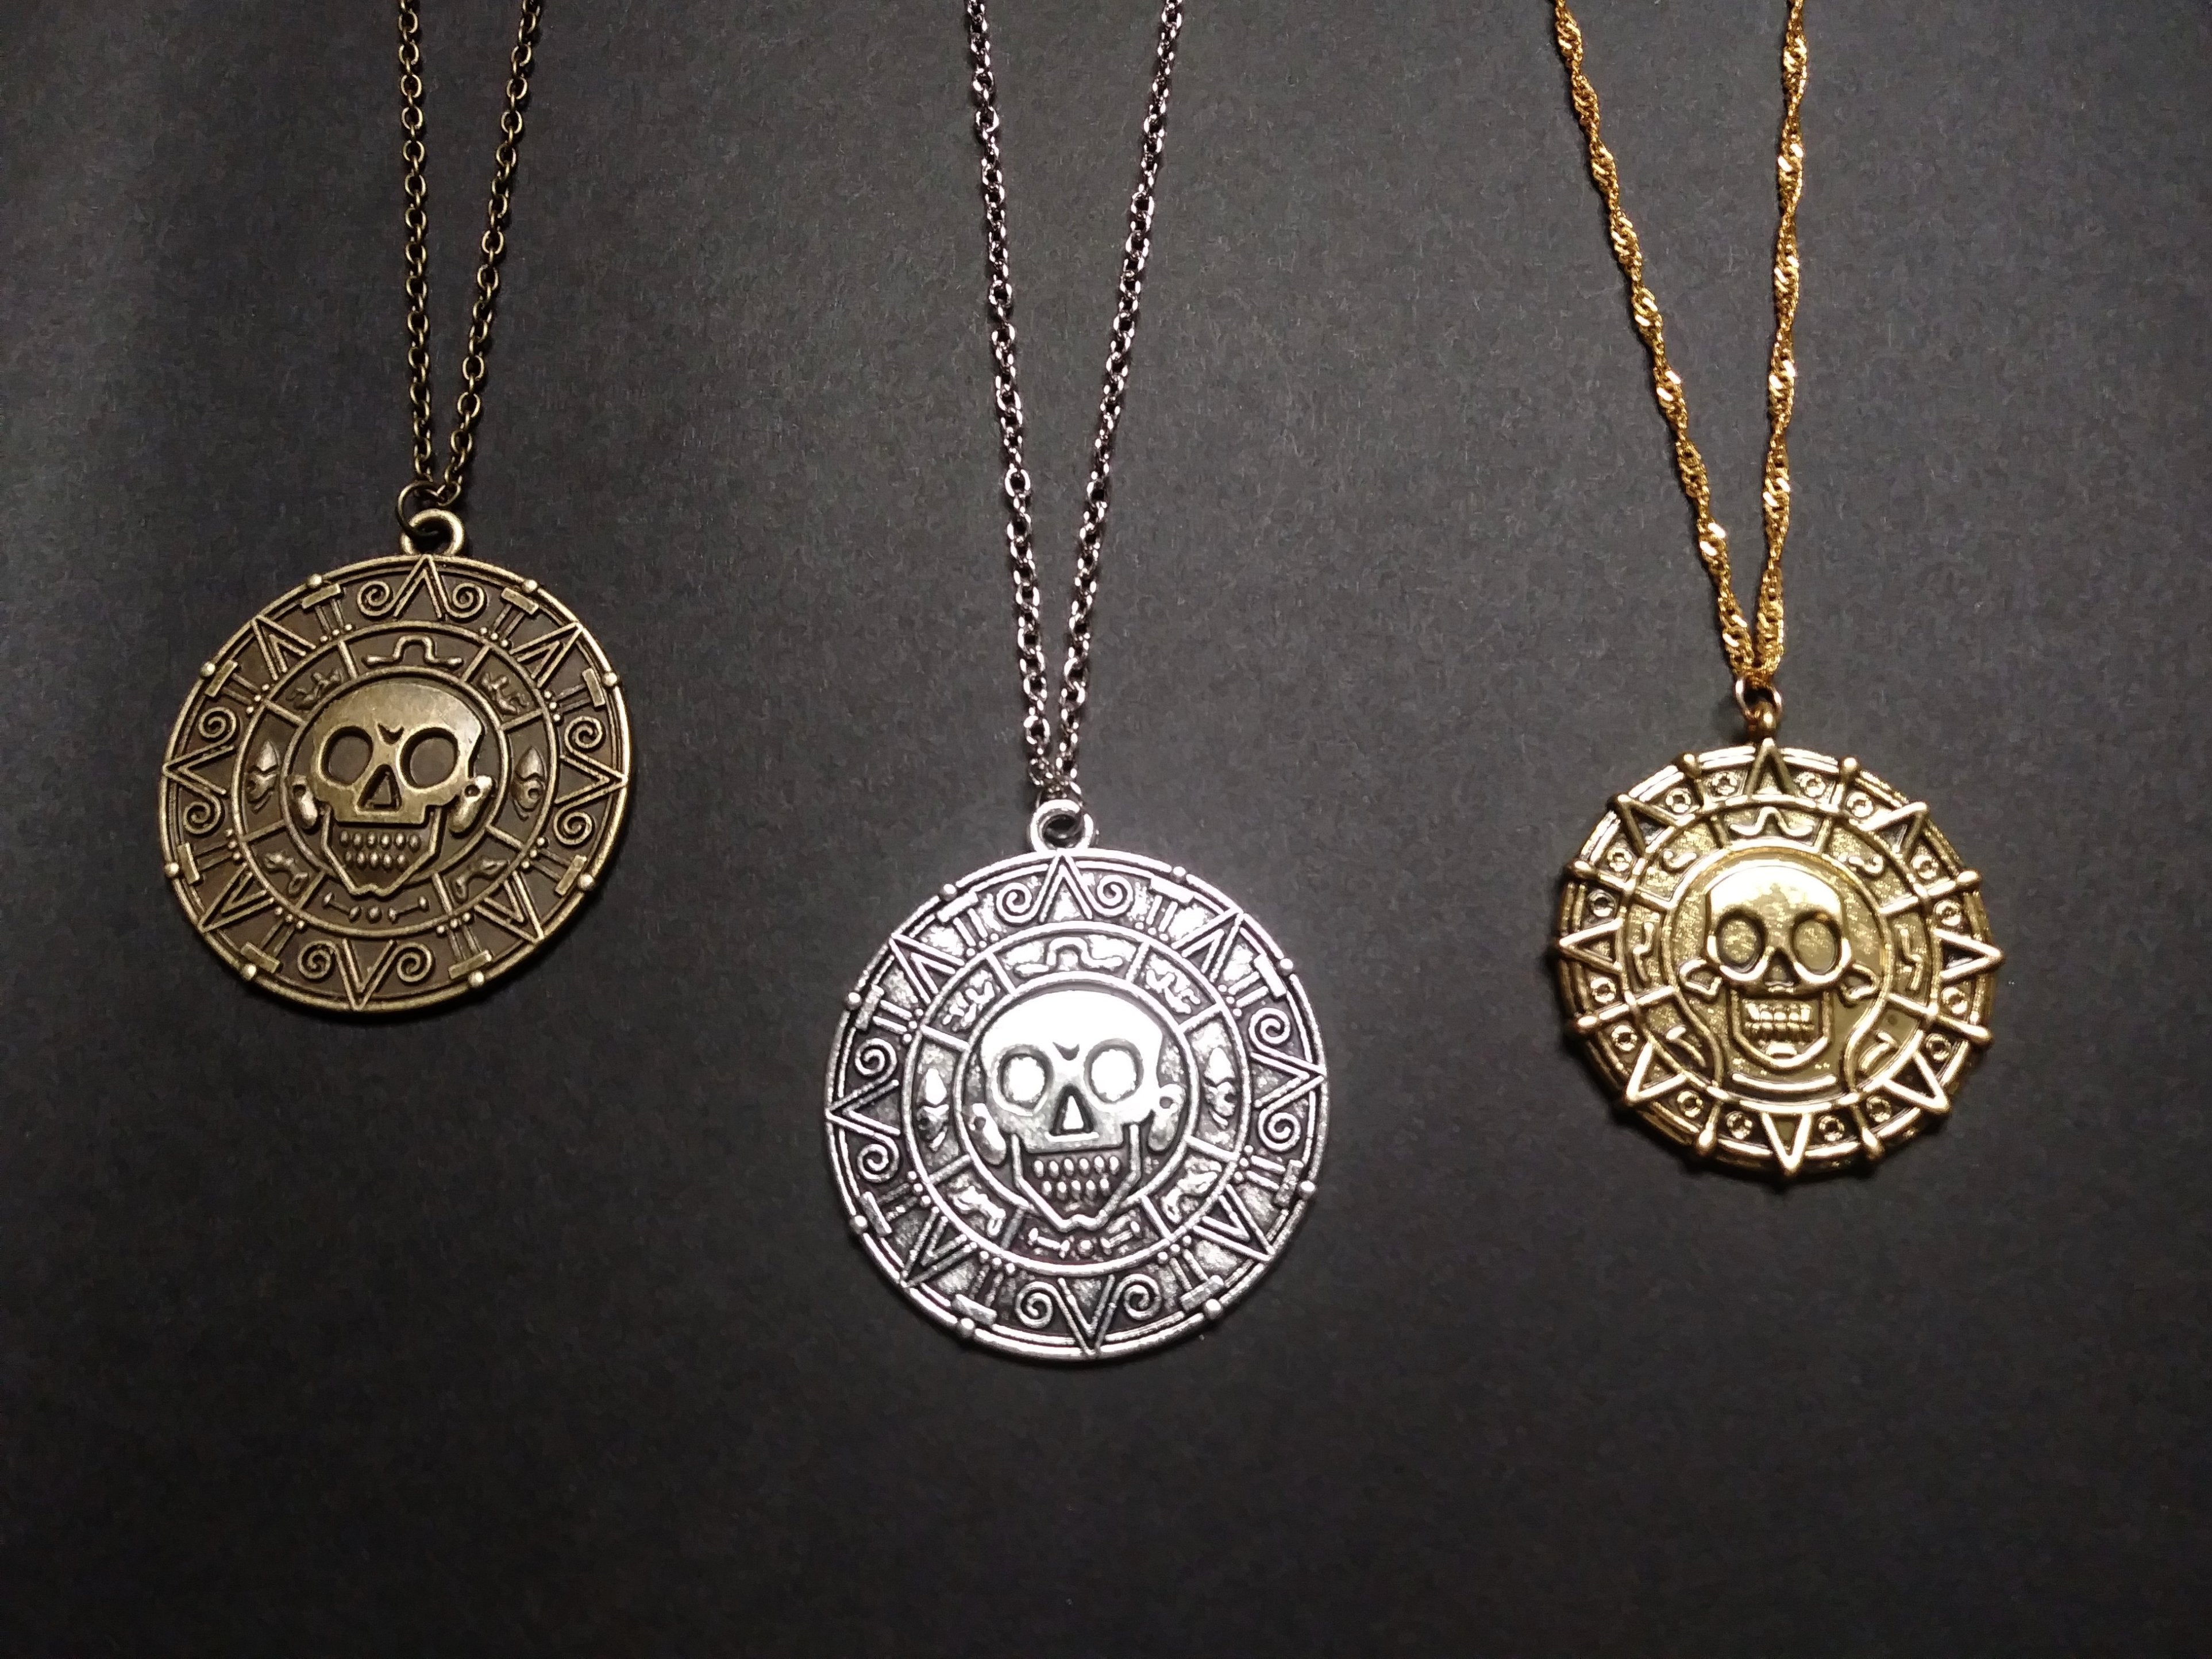 Aztec Coin Pirates Of The Caribbean Aztec Gold Coin Necklace Human Skull  Sweater Pendant Jewelry Necklaces & Pendants Hot Sale From Kuaying518,  $0.42 | DHgate.Com